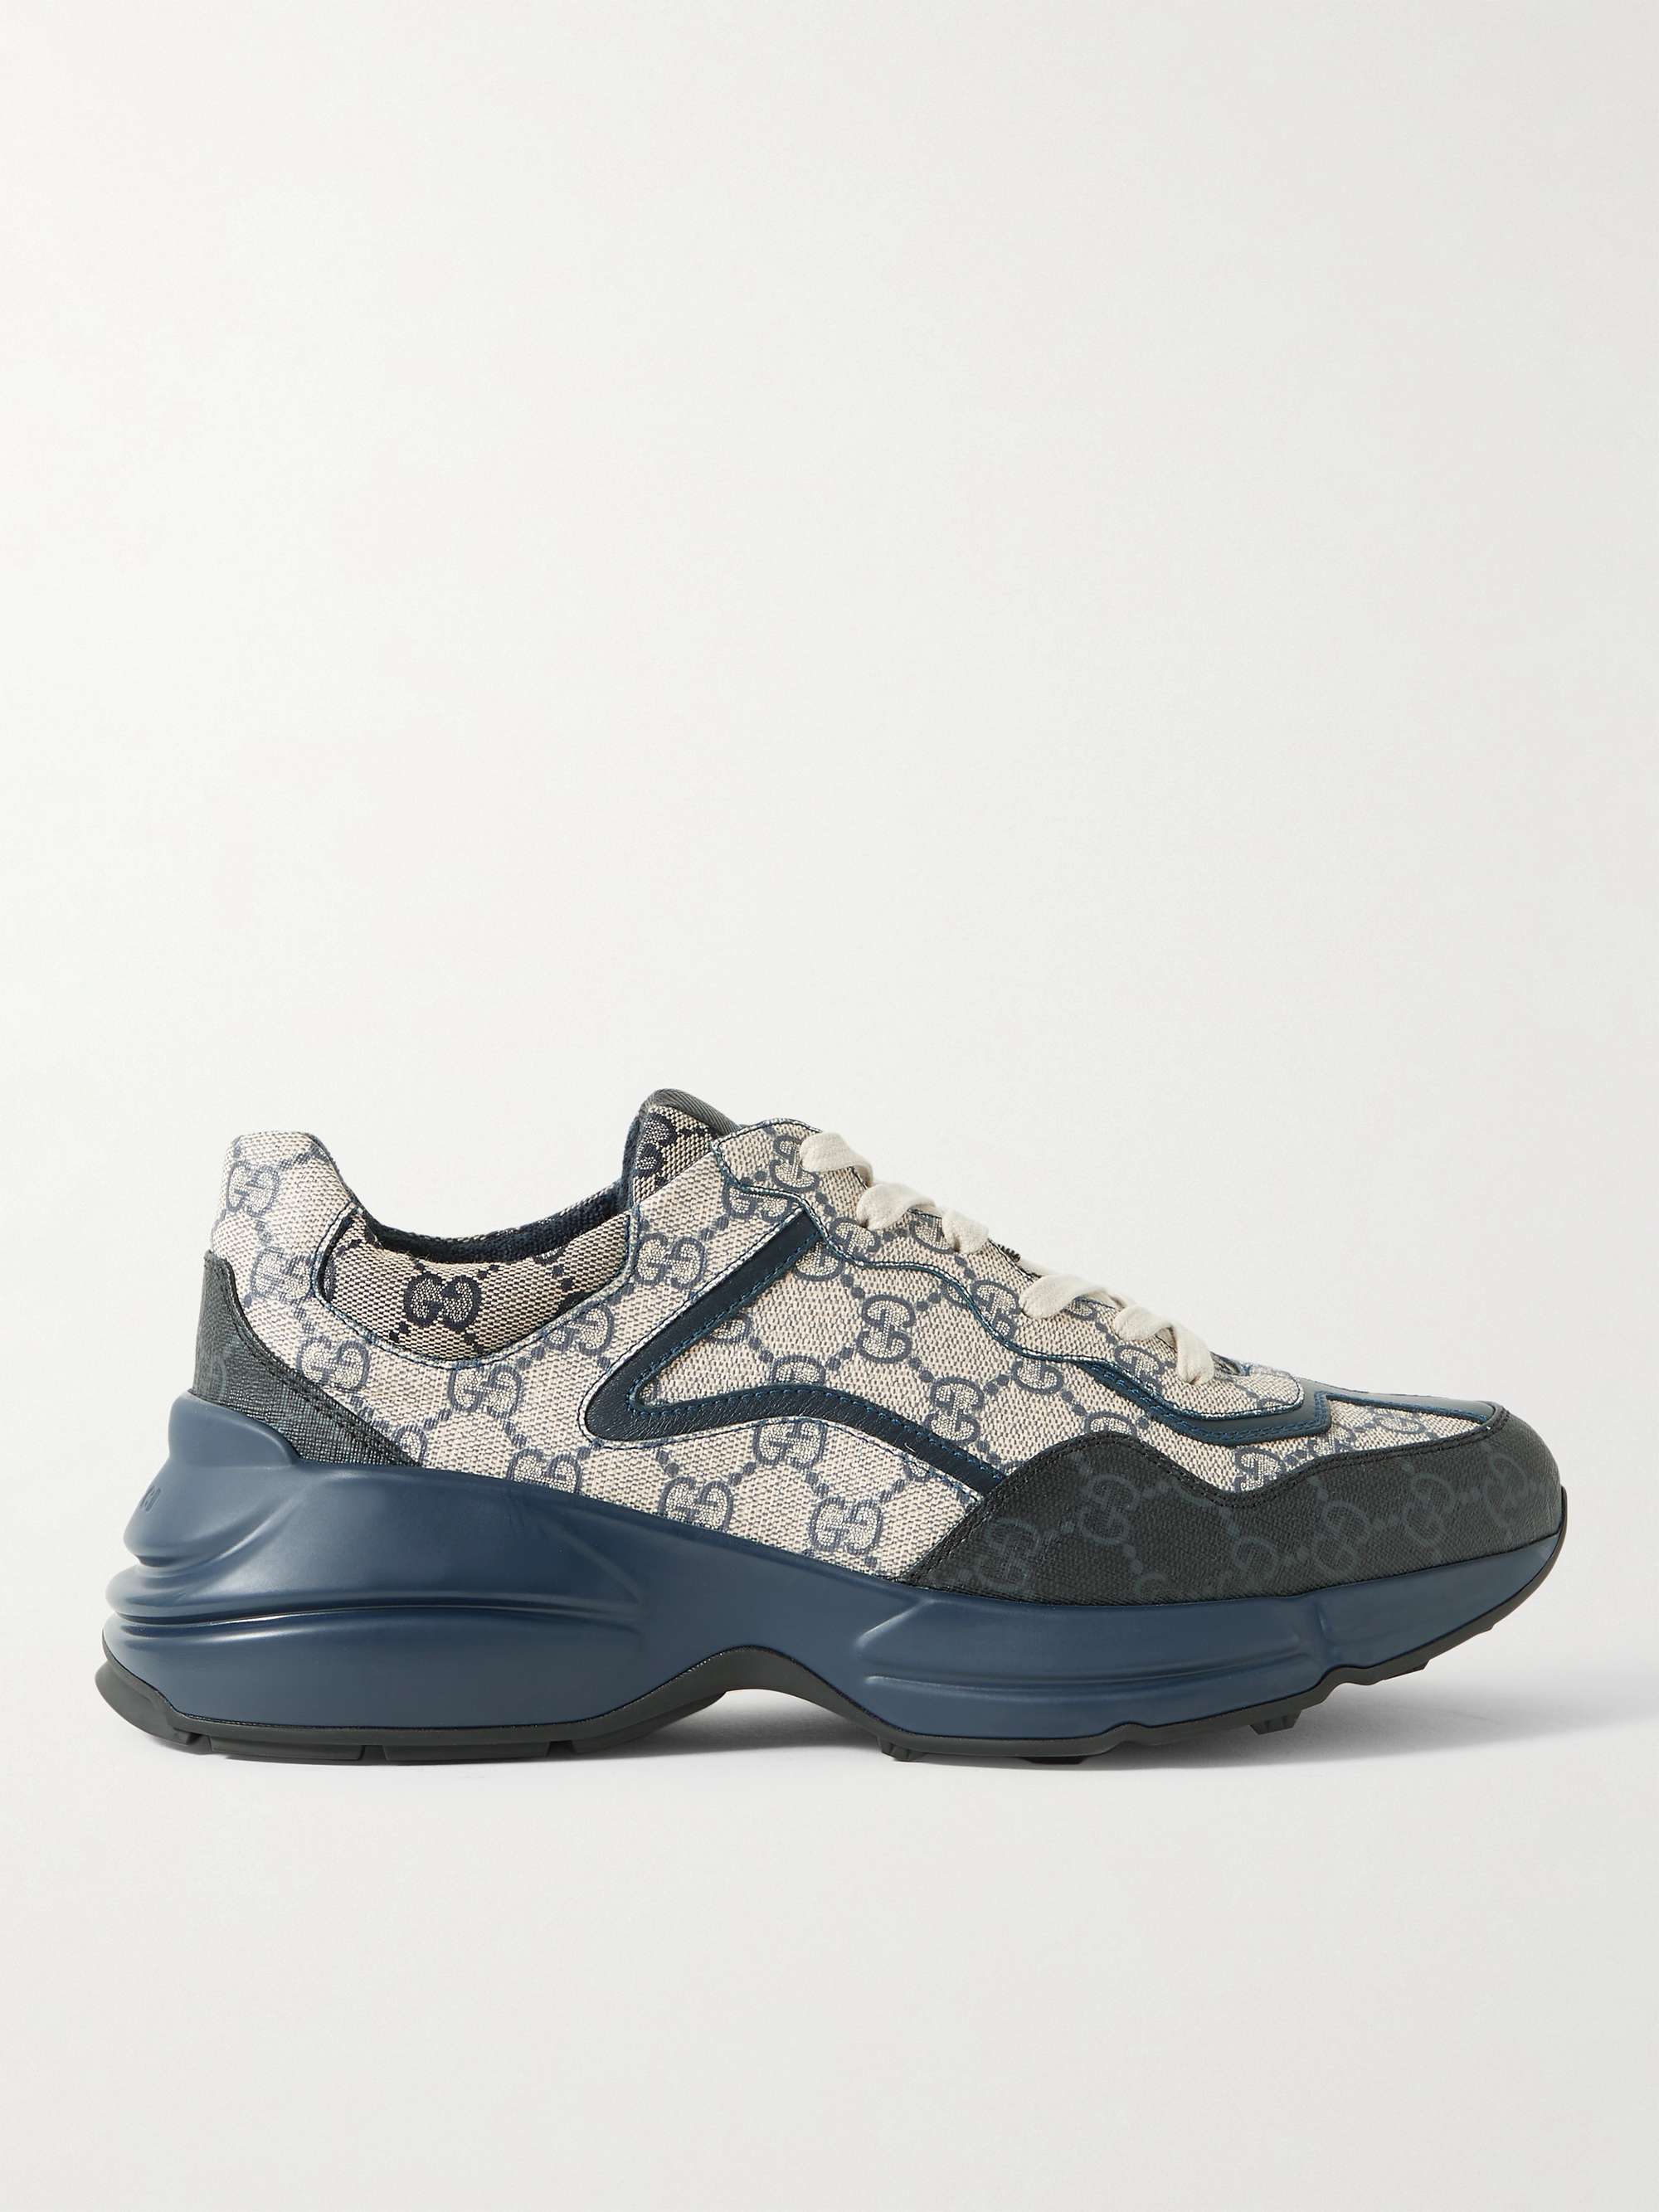 Gucci Men's Rhyton GG-print Leather and Canvas Sneakers - Blue - Low-top Sneakers - 10.5